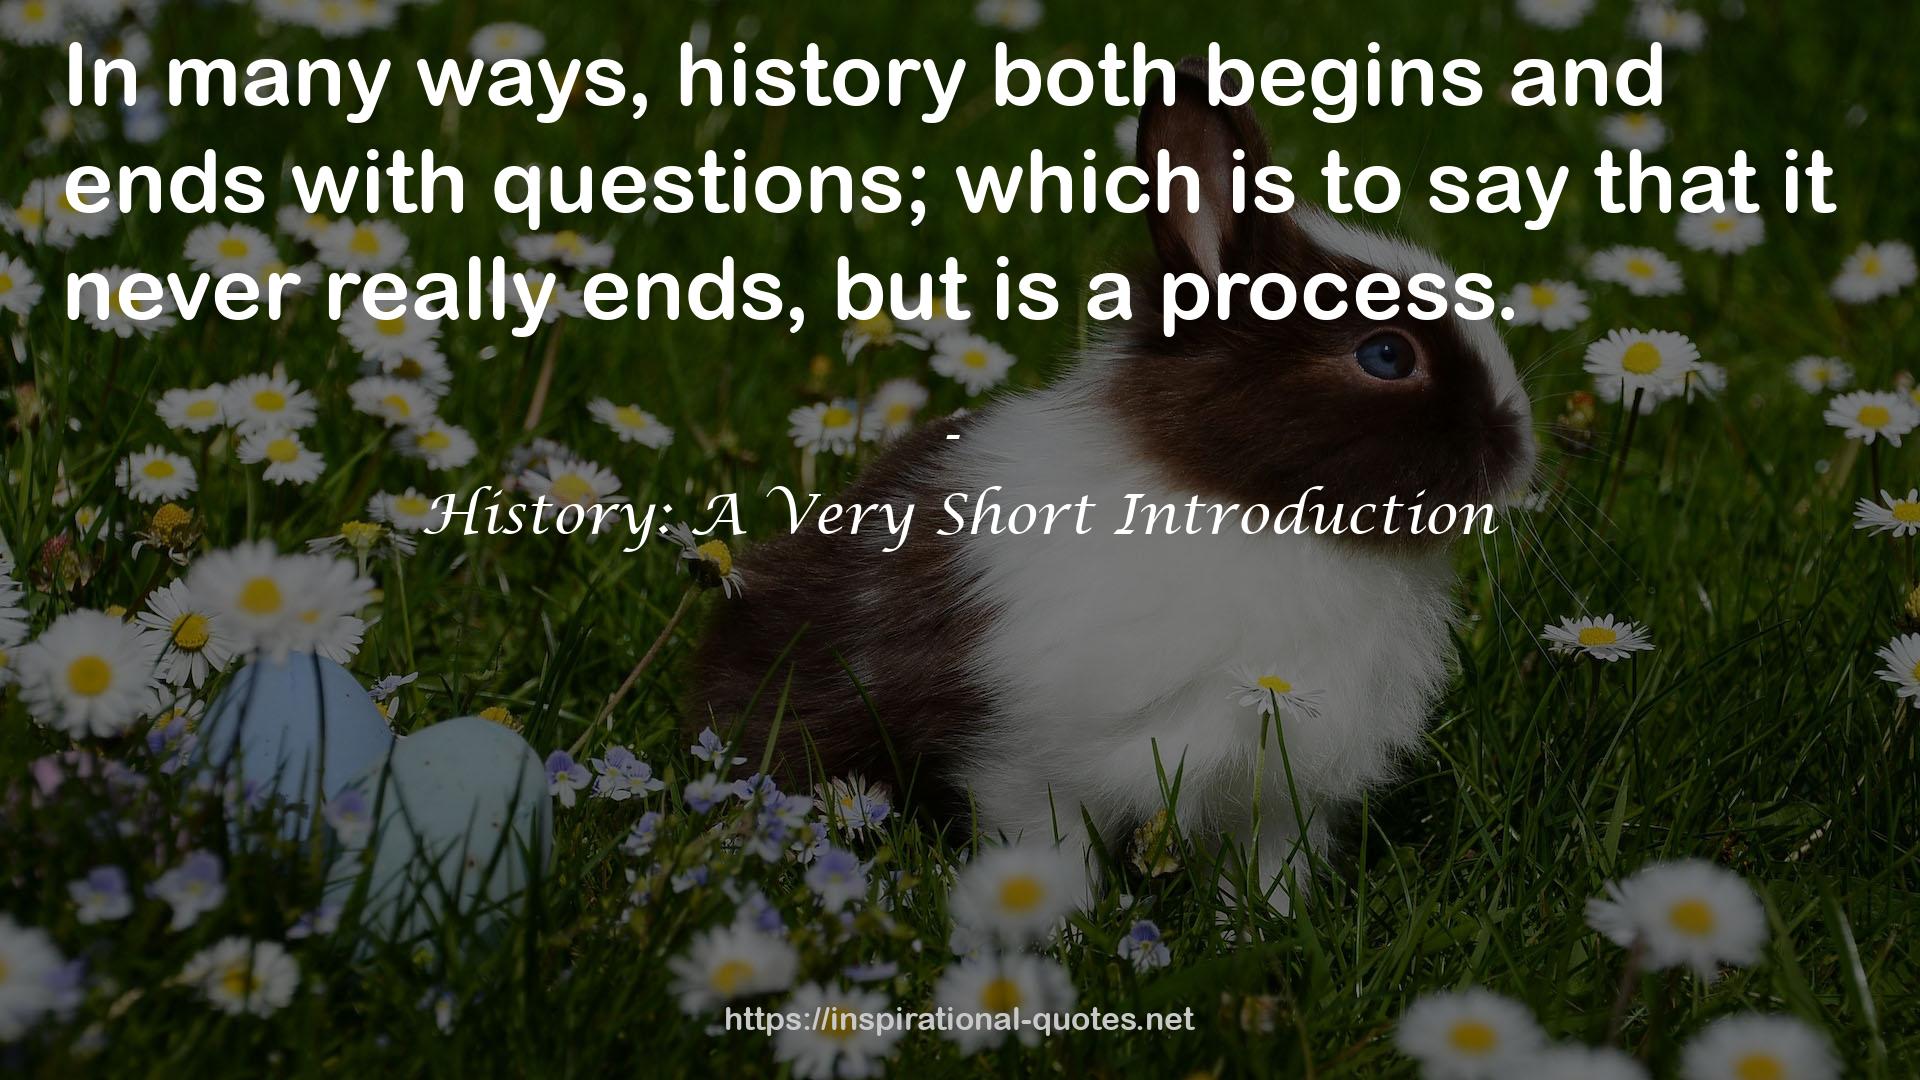 History: A Very Short Introduction QUOTES